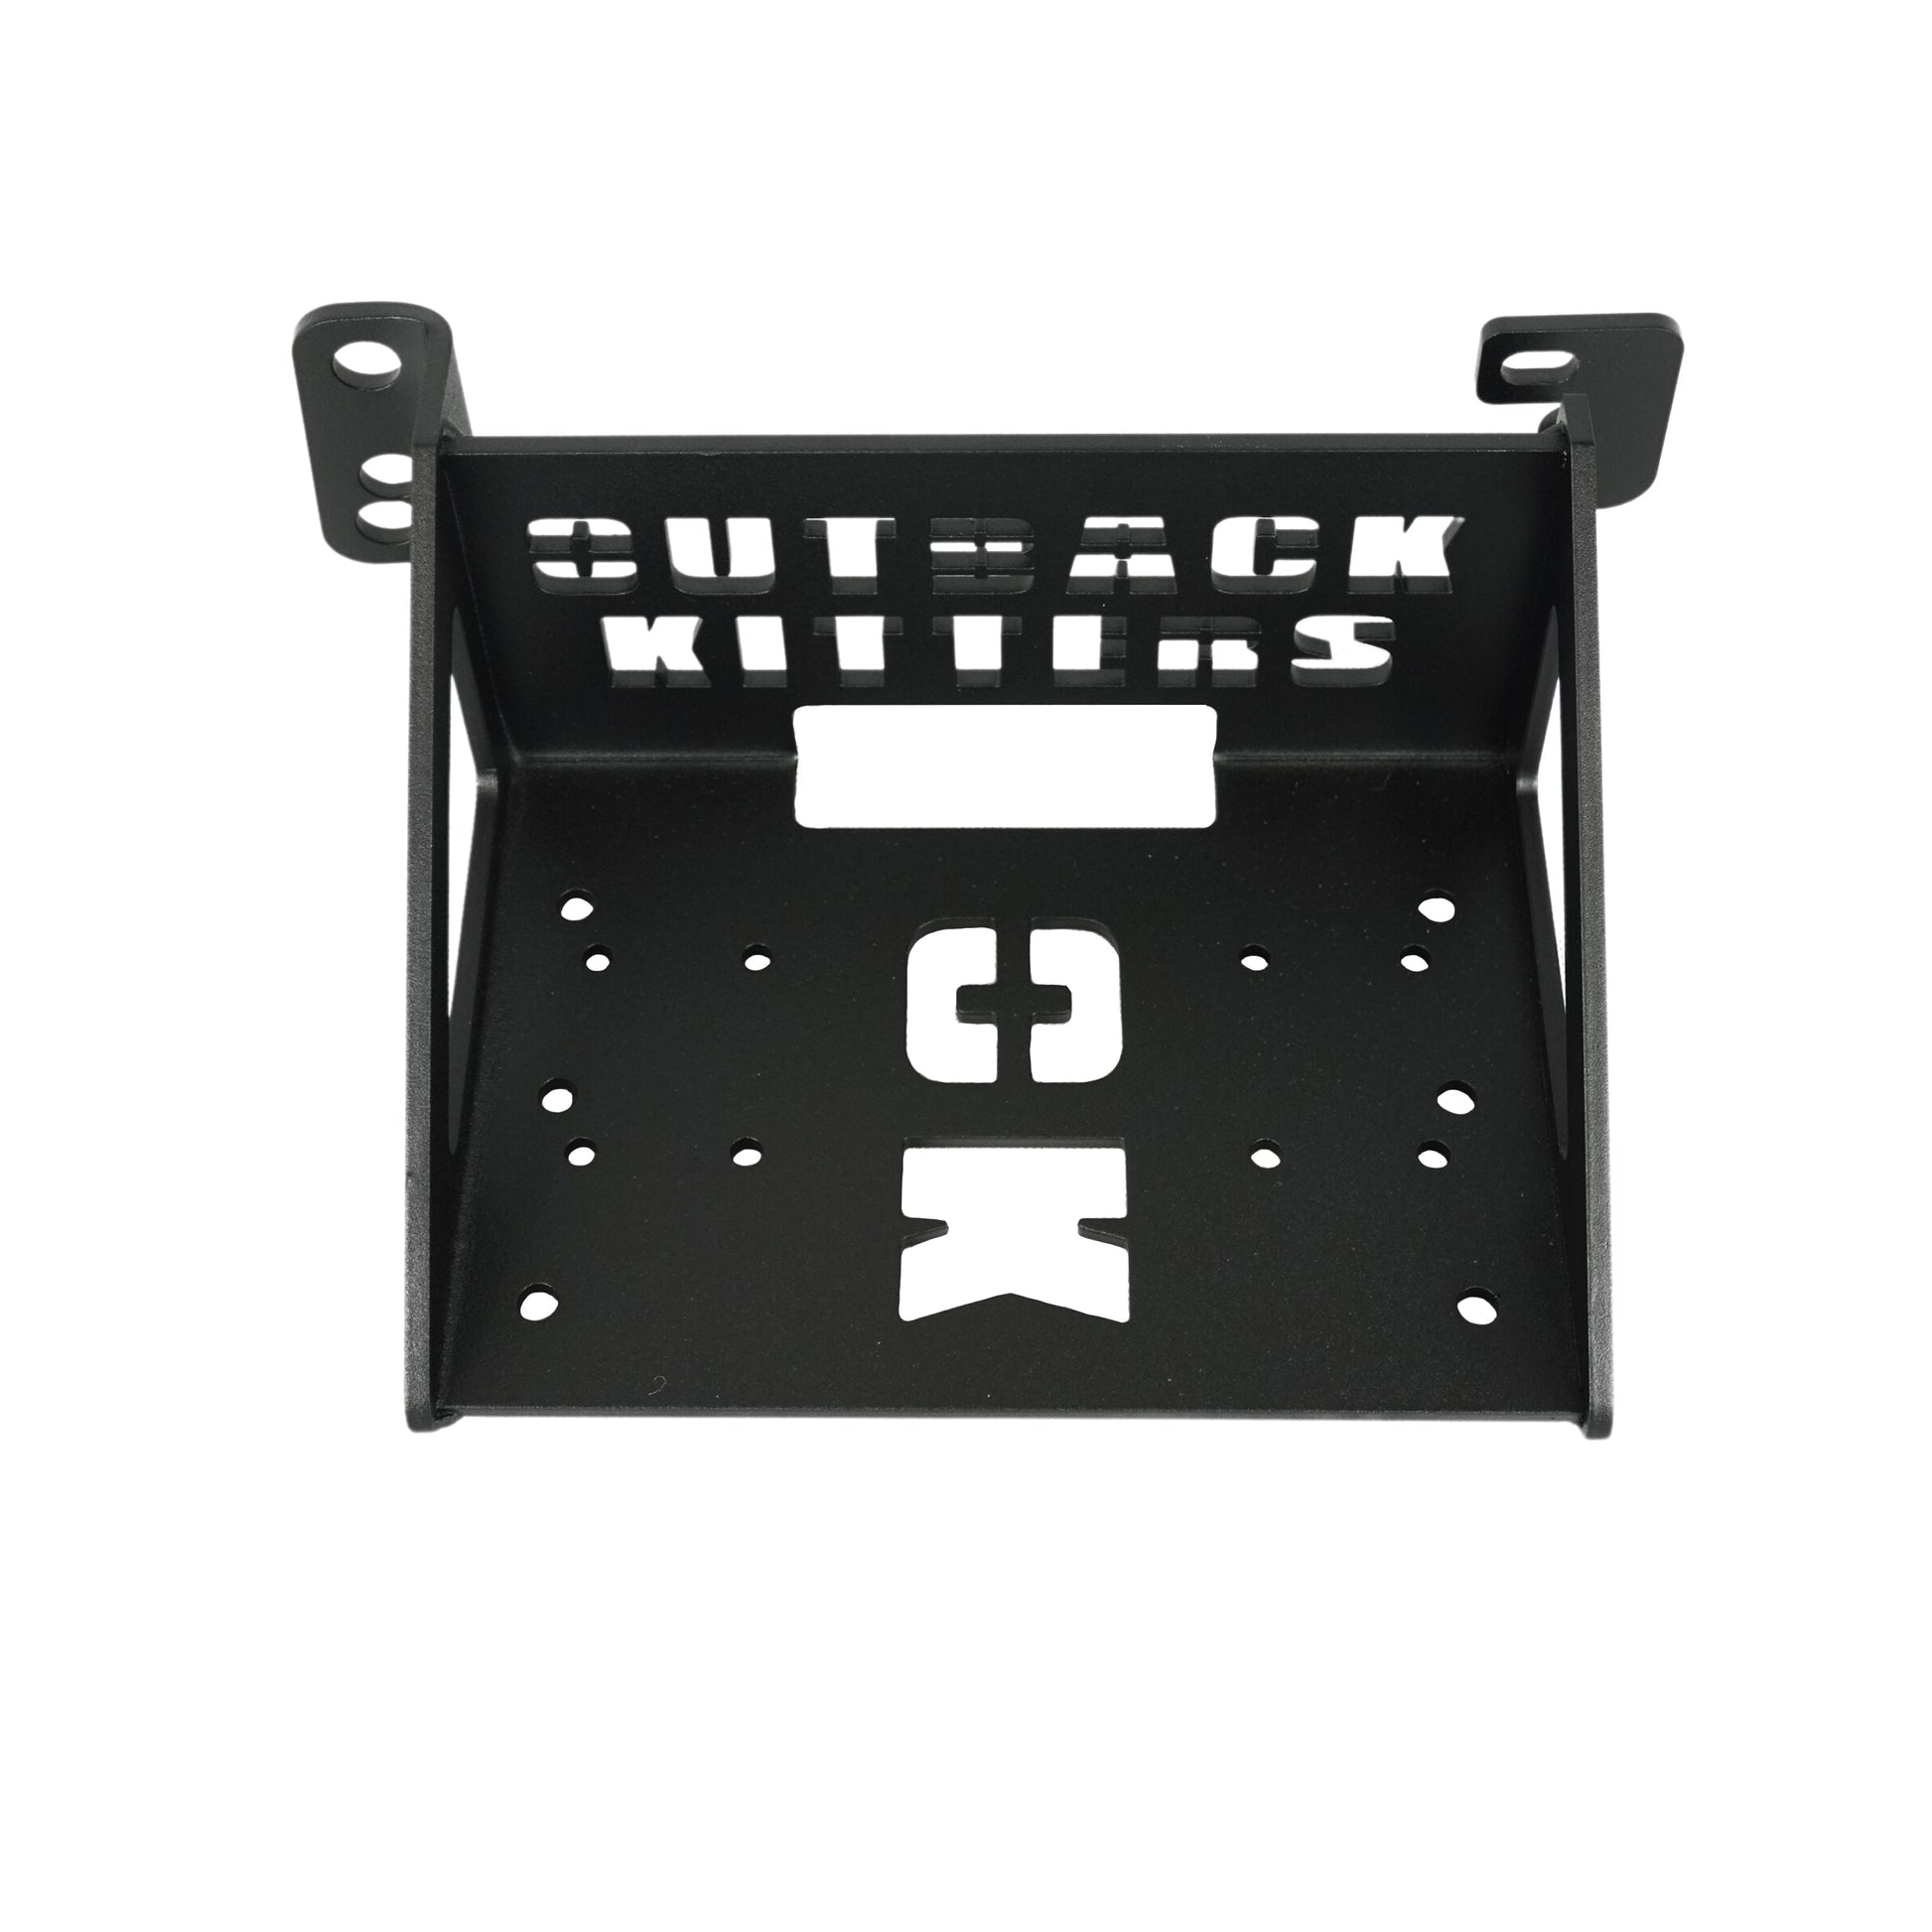 Outback Kitters Twin Compressor Mount to suit Ram 2500 - Outback Kitters